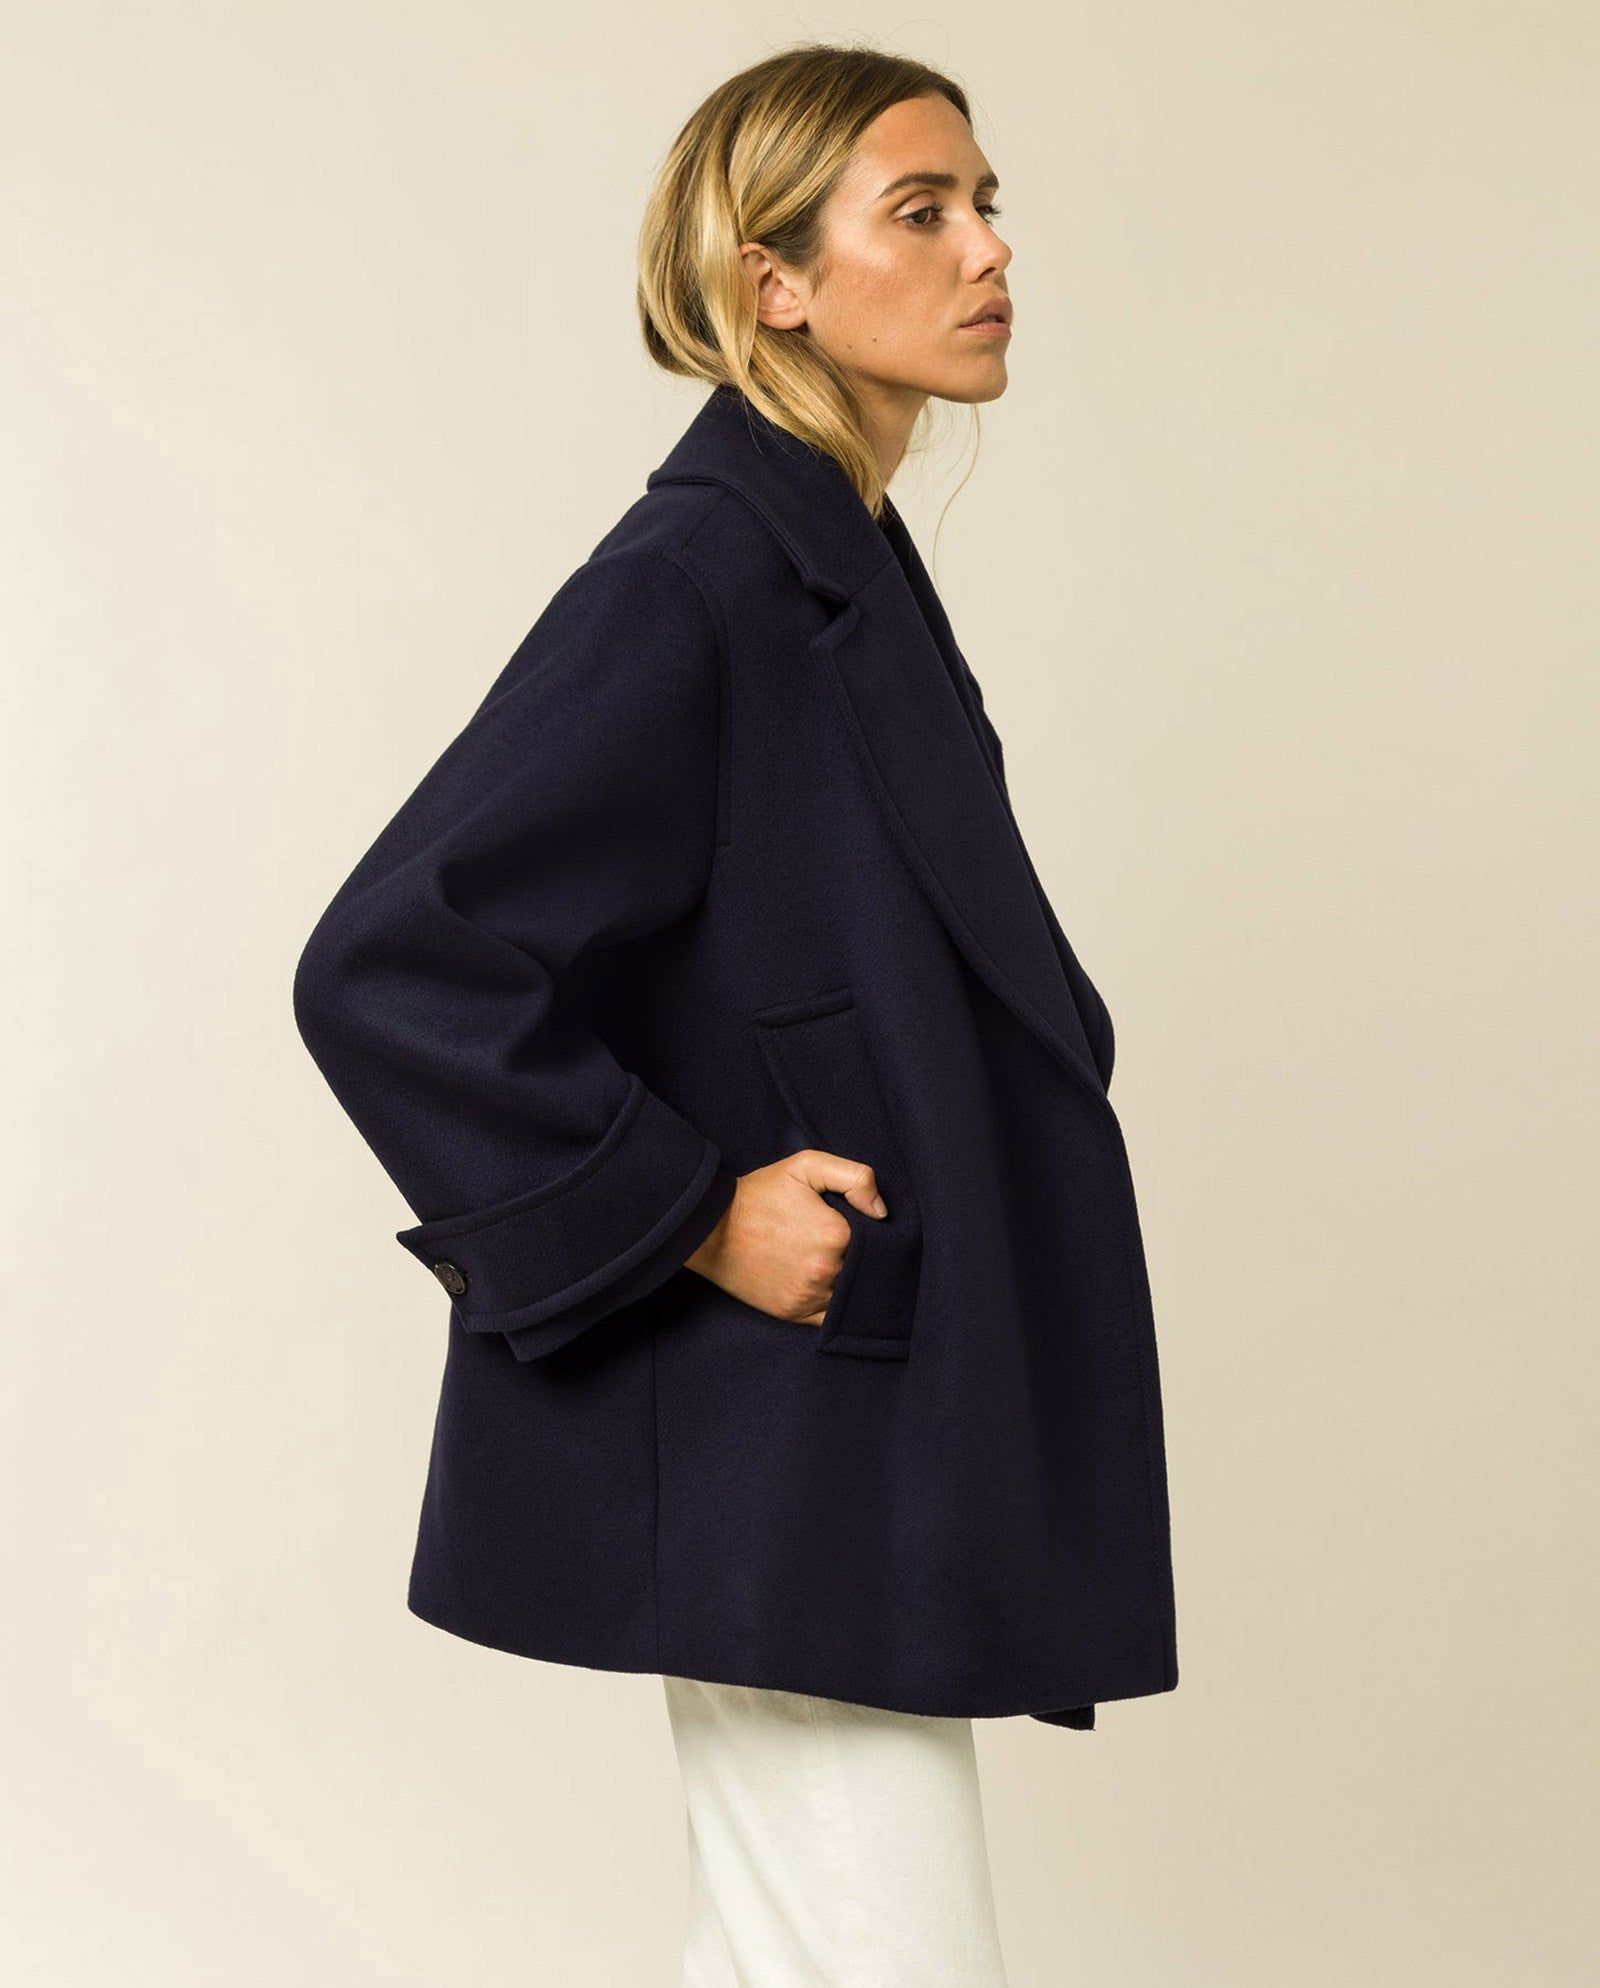 Finding the Perfect Fit: Plus Size Pea
Coats for Every Body Shape